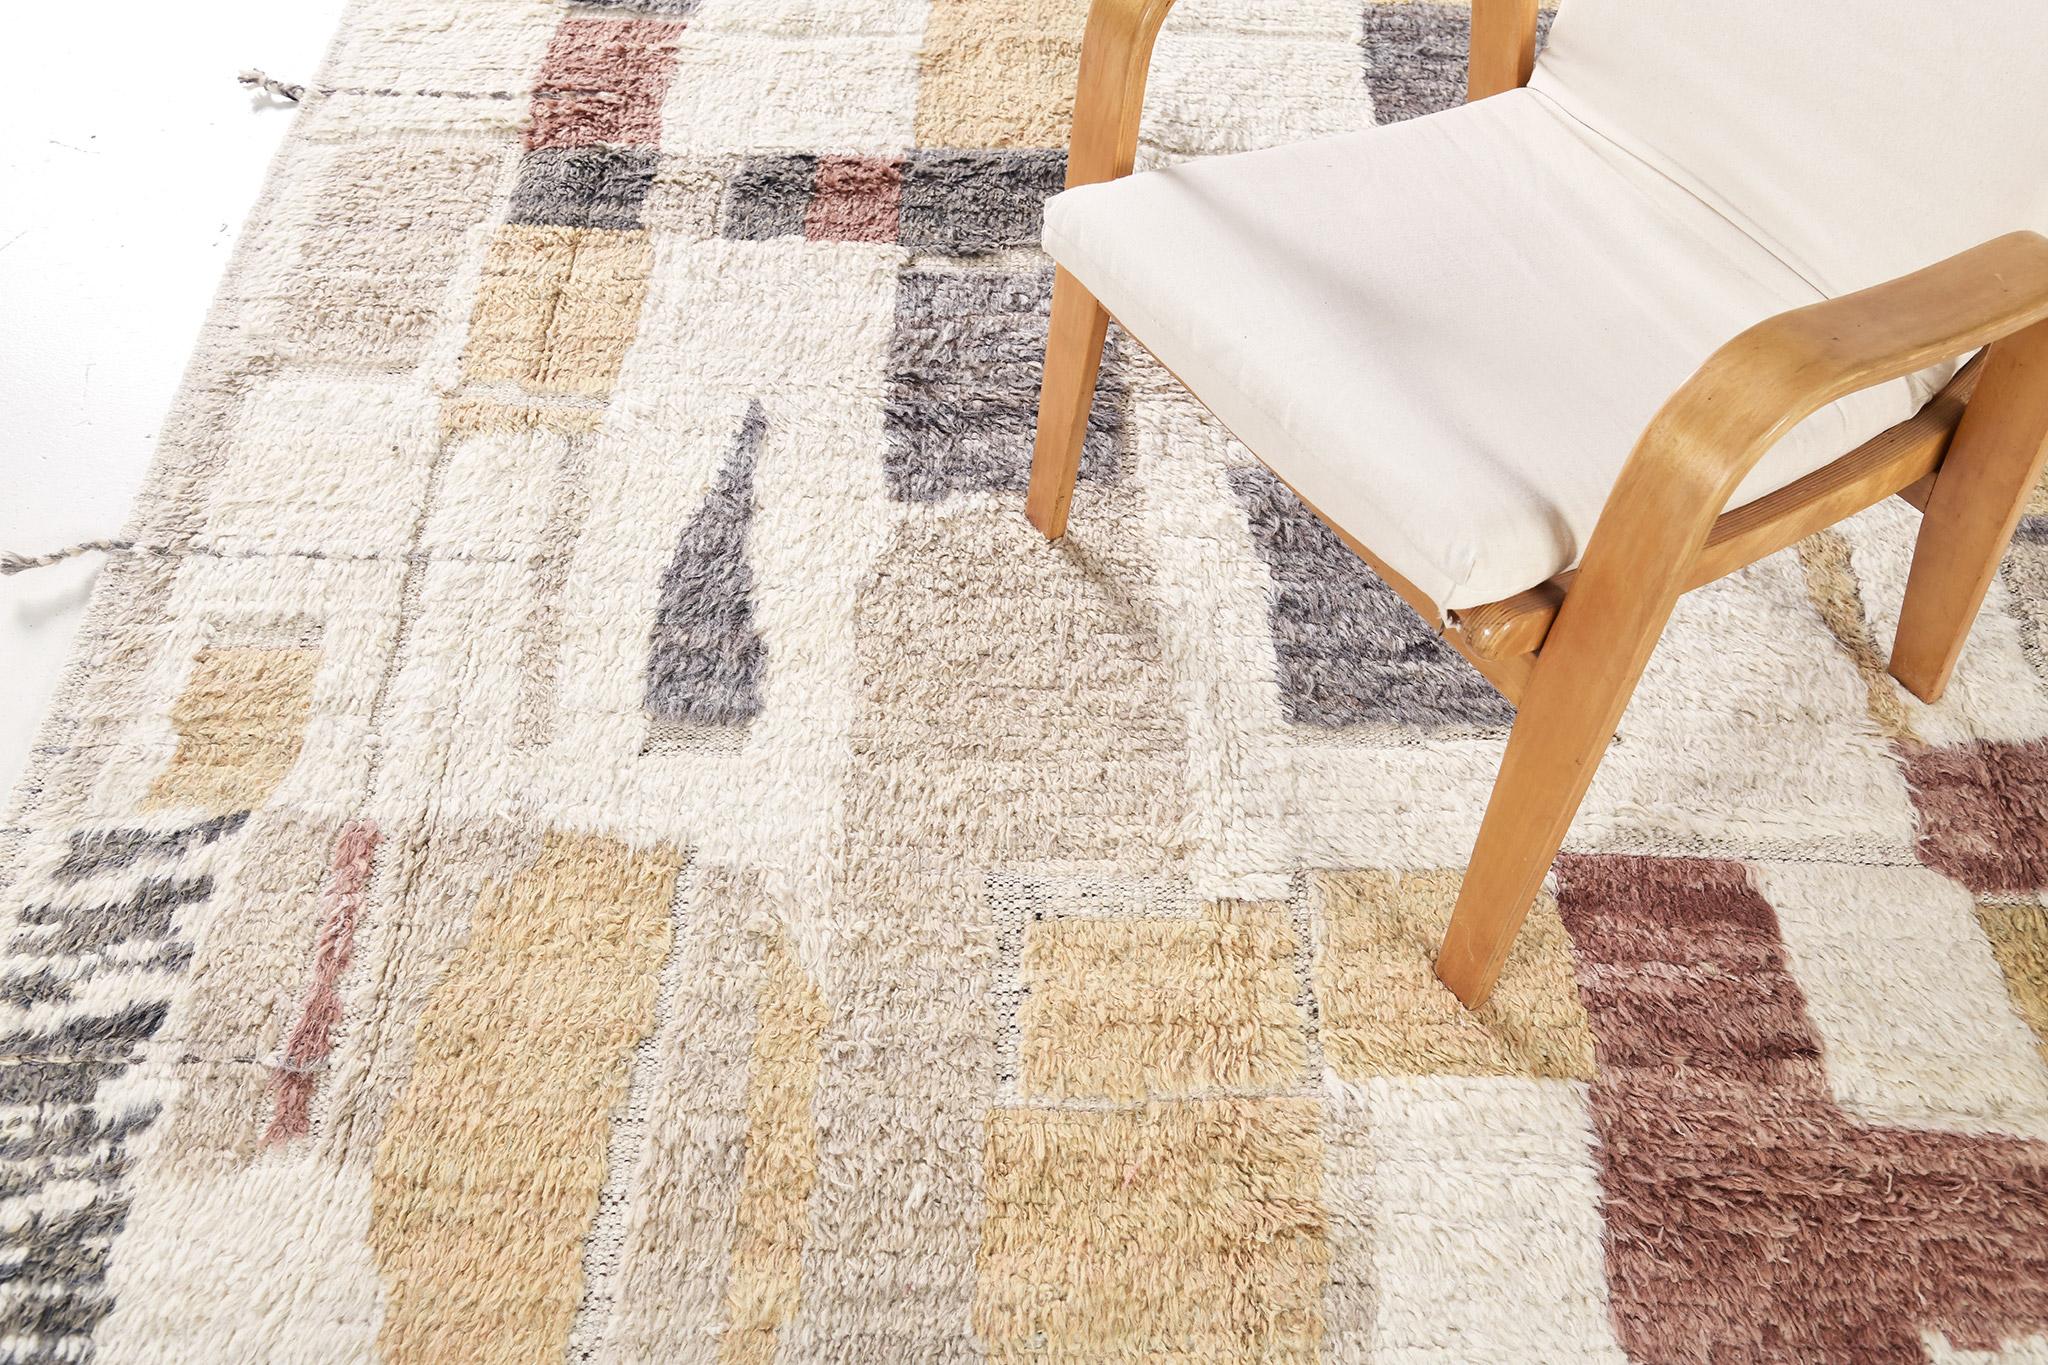 Myza is gorgeous wool textured to look weathered as it combines special design elements for the modern design world. Its weaving of natural earth tones and playfulness is suitable for many interiors and is what makes the Atlas Collection so unique